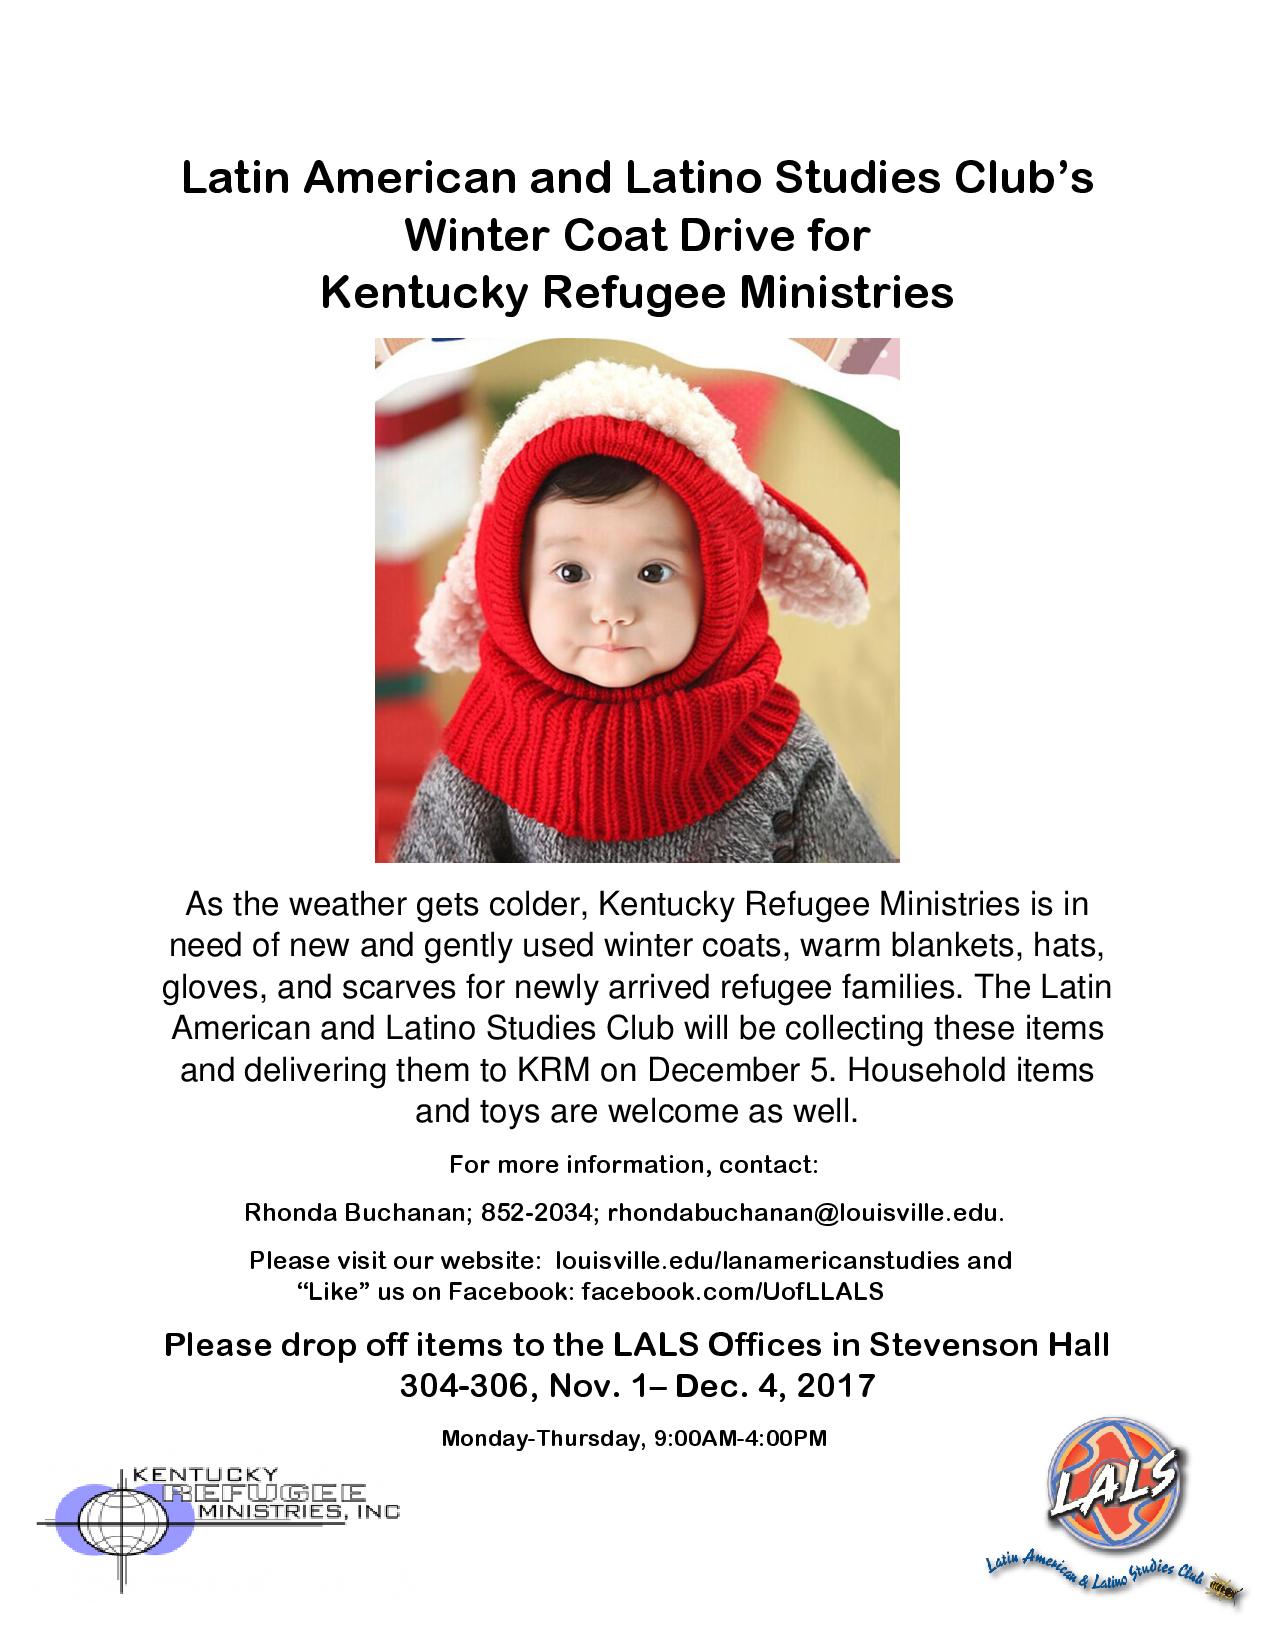 LALS Club Hosts Annual Kentucky Refugee Ministries Coat Drive